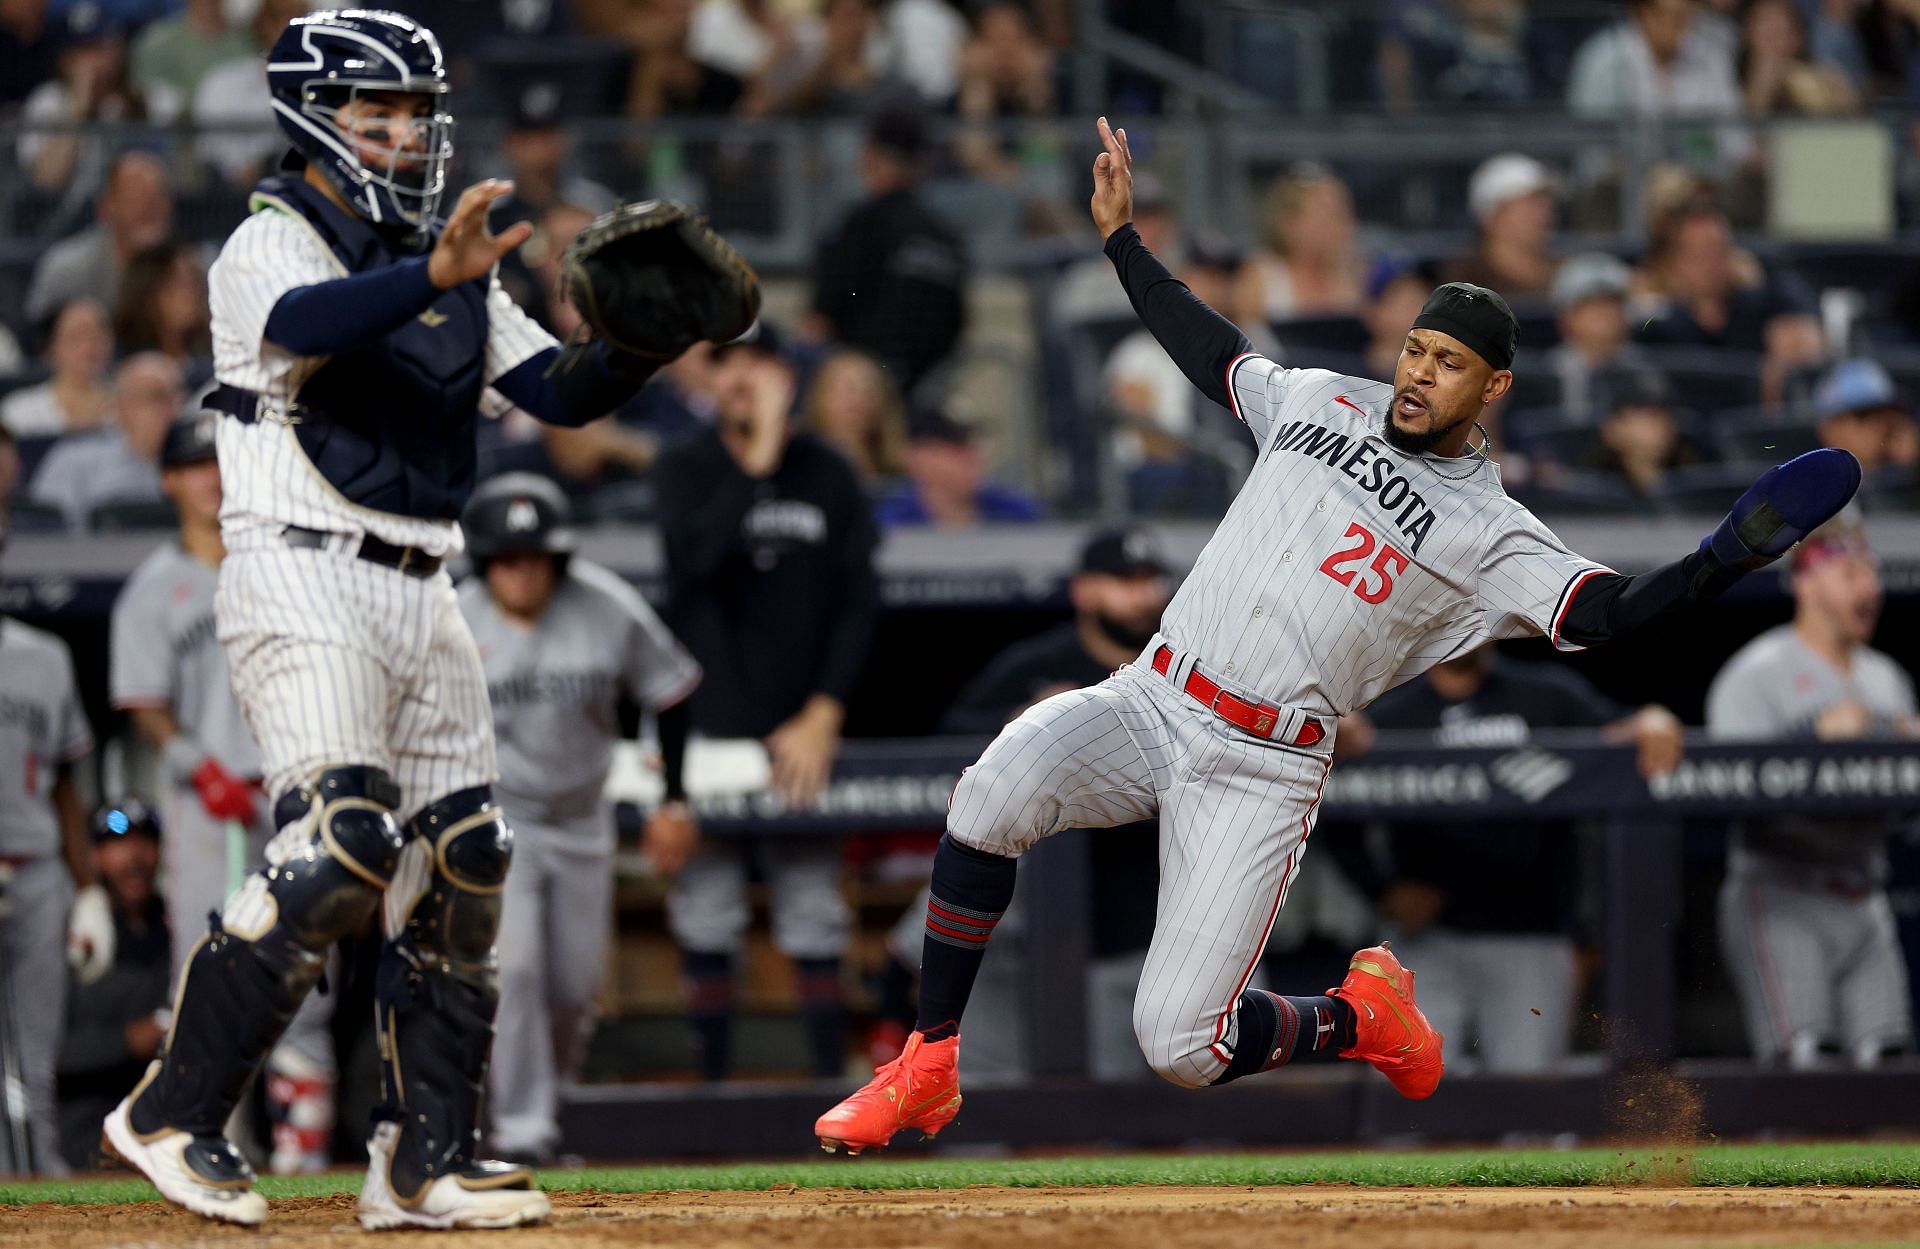 Clay Holmes costs New York Yankees in loss to Boston Red Sox